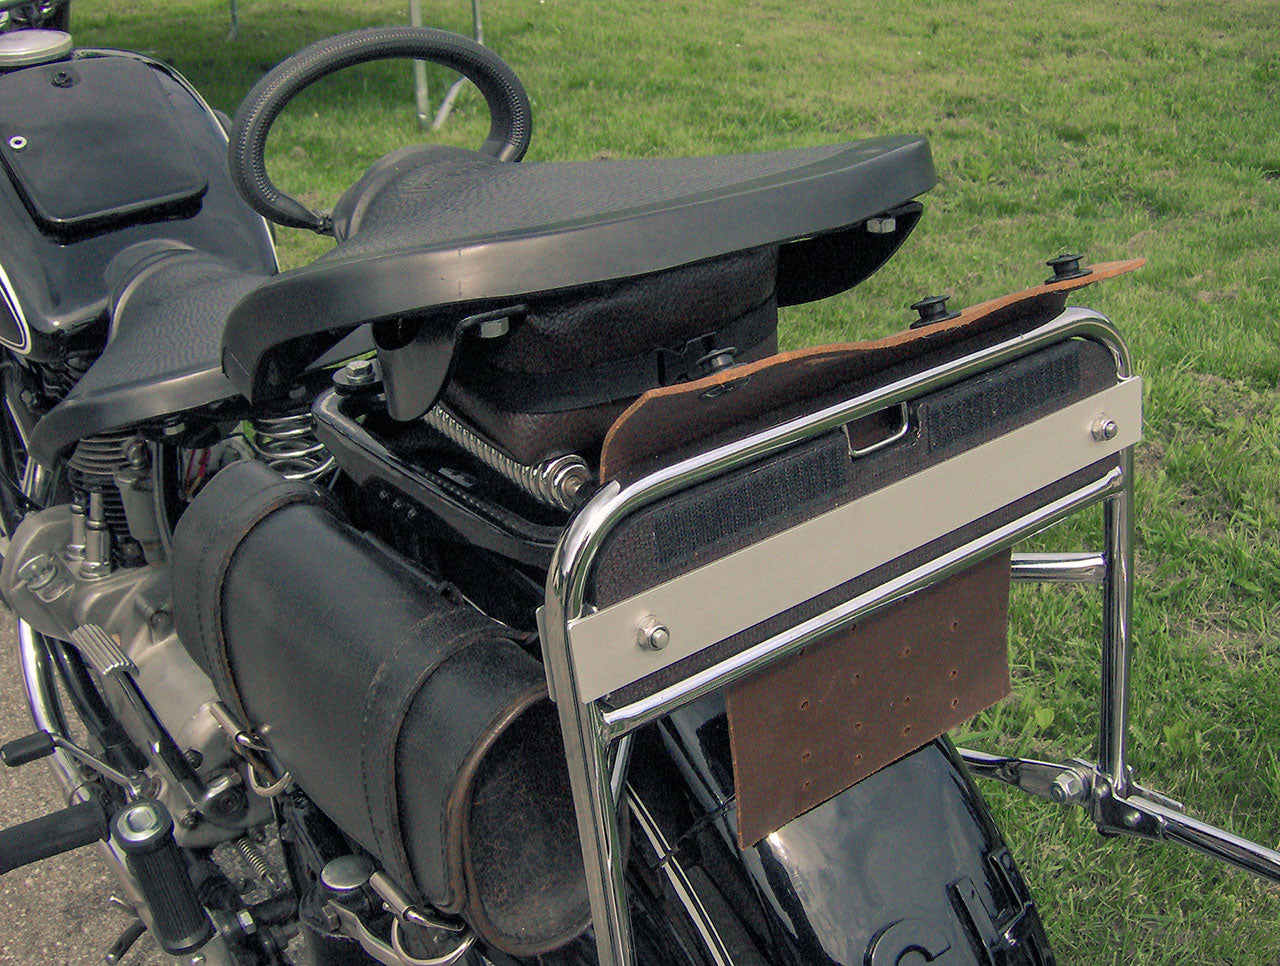 Luggage support for vintage motorcycle bags.